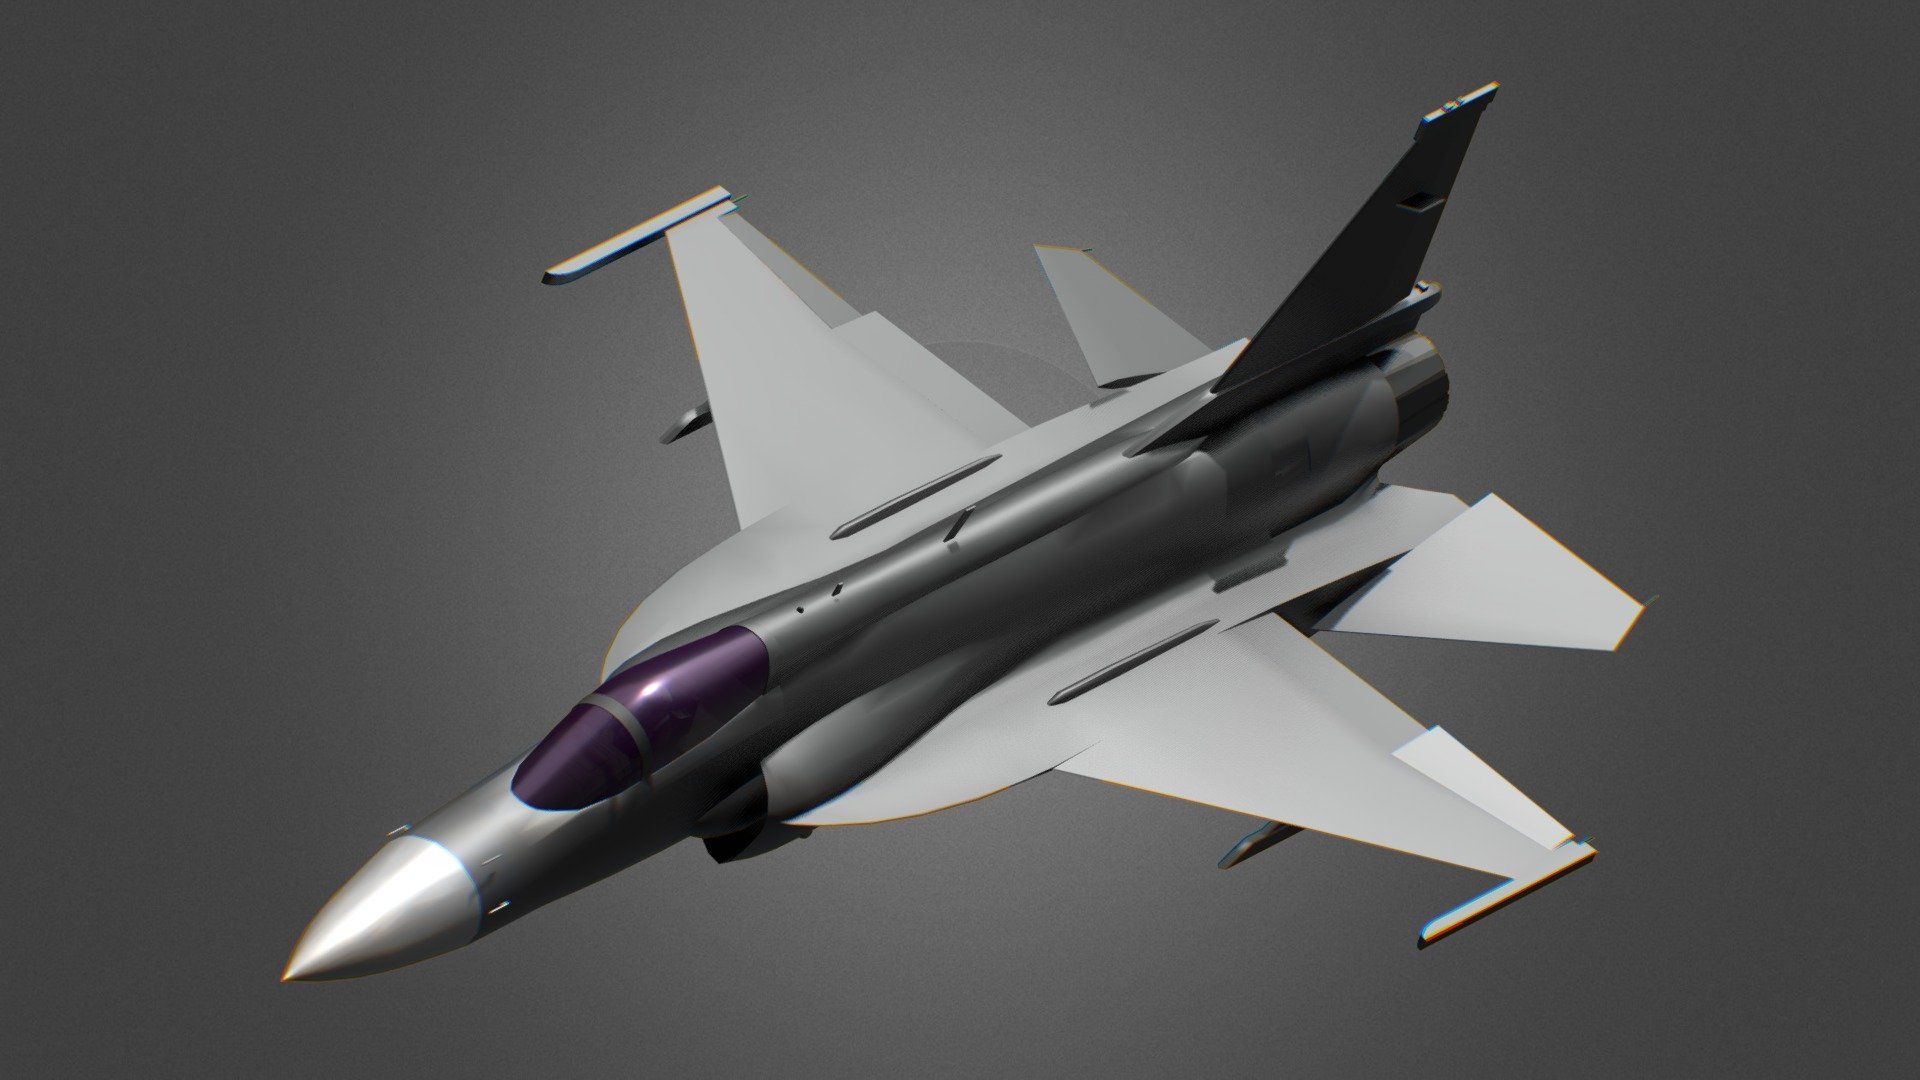 JF 17 THUNDER BLOCK II GAME READY (LOWPOLY) Model By Bramsh 3D [f4e8f99]